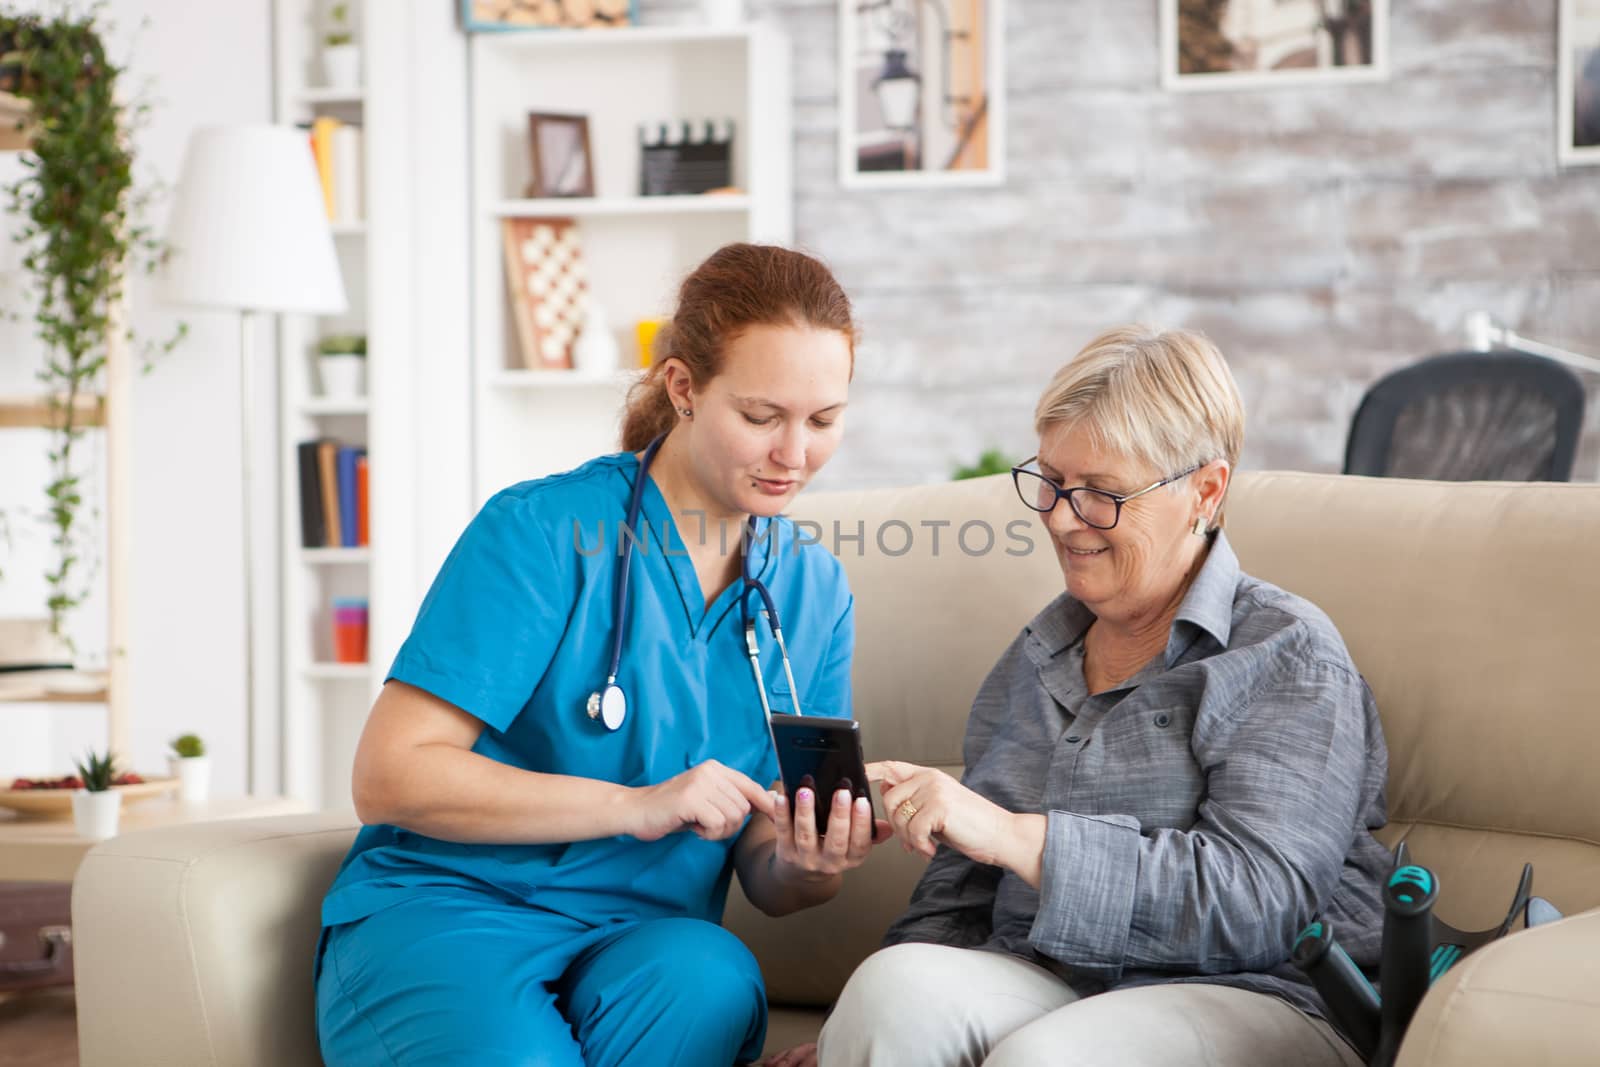 Pretty nurse helping senior woman how to use mobile phone by DCStudio